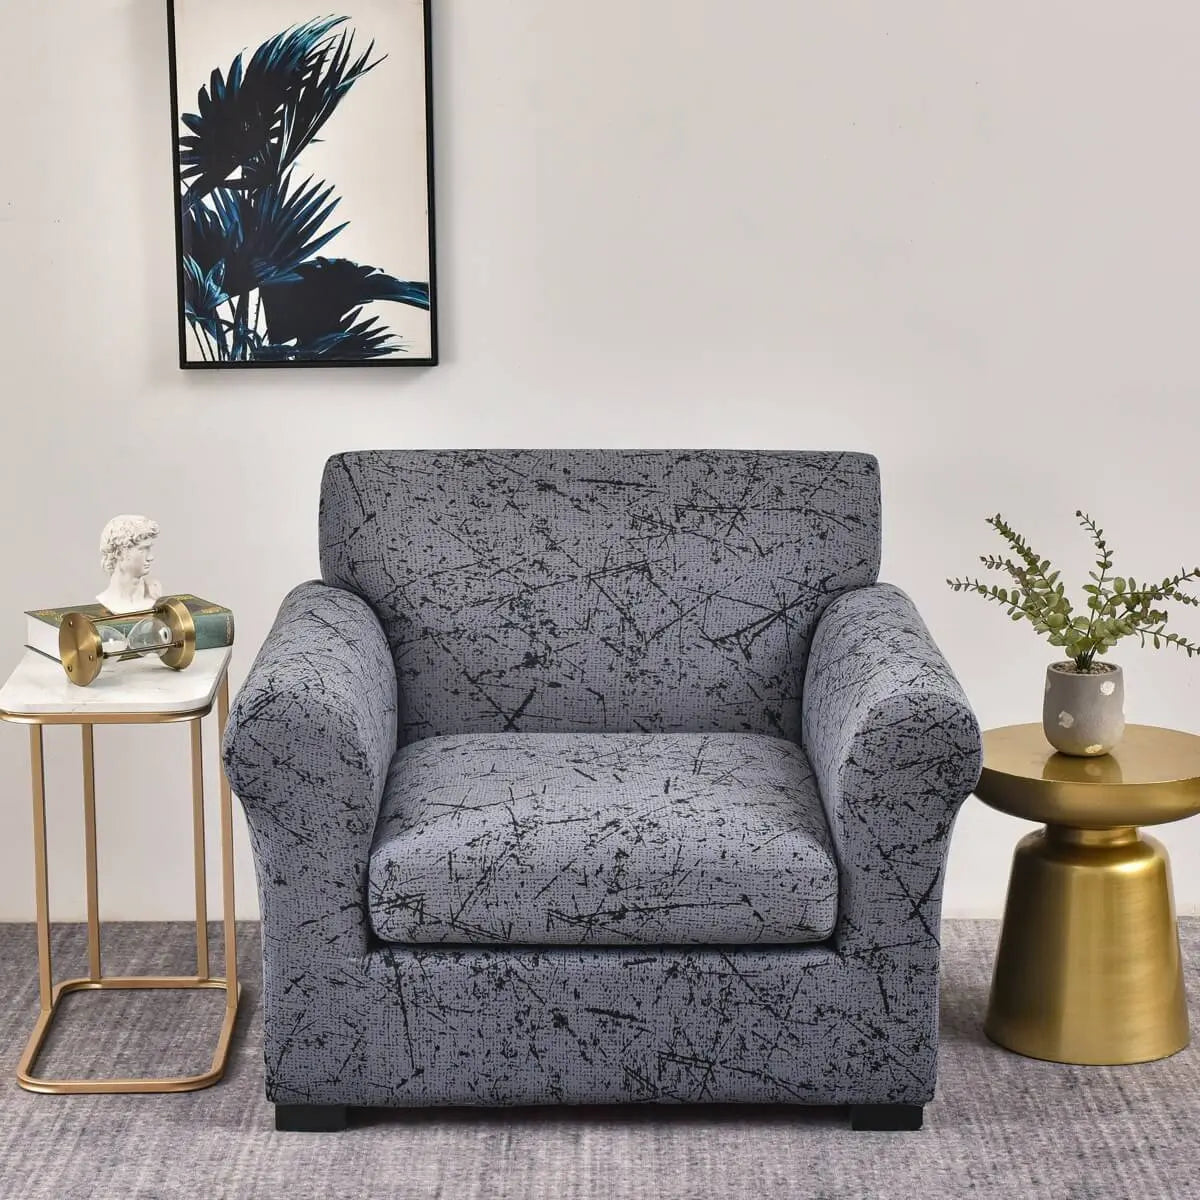 Crfatop Stretch Armchair Cover Slipcovers for 1 Seater Chair Slip Cover Grey